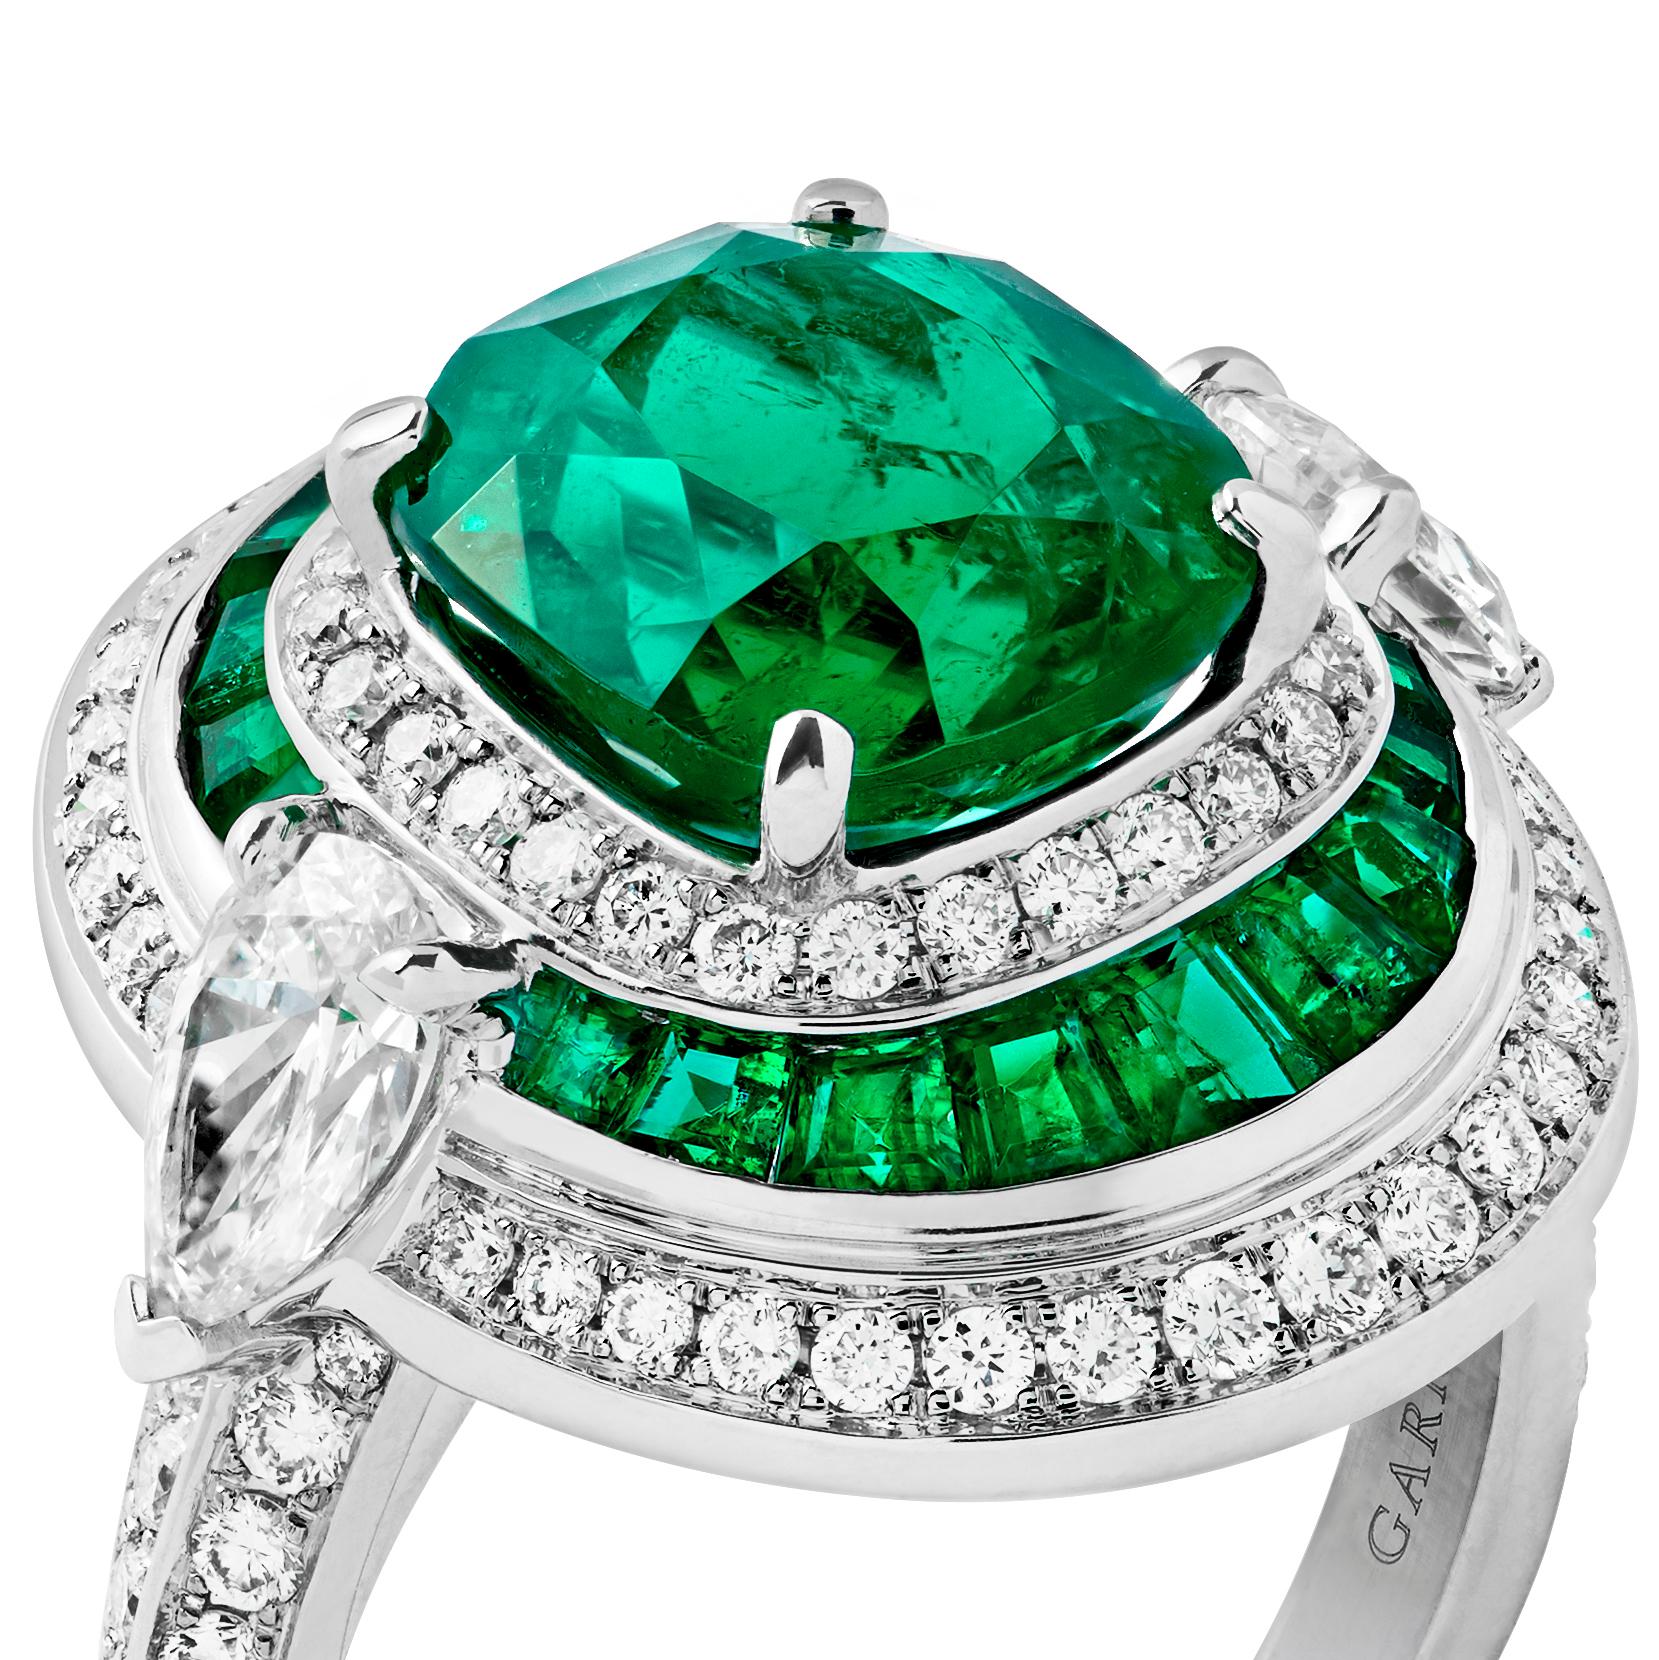 A House of Garrard 18 karat white gold ring from the Jewelled Vault collection, set with a central CDC certified cushion cut 3.08 carat emerald, 18 calibre cut emeralds weighing 1.44 carats, 96 round white diamonds weighing 0.64 carats and 2 pear